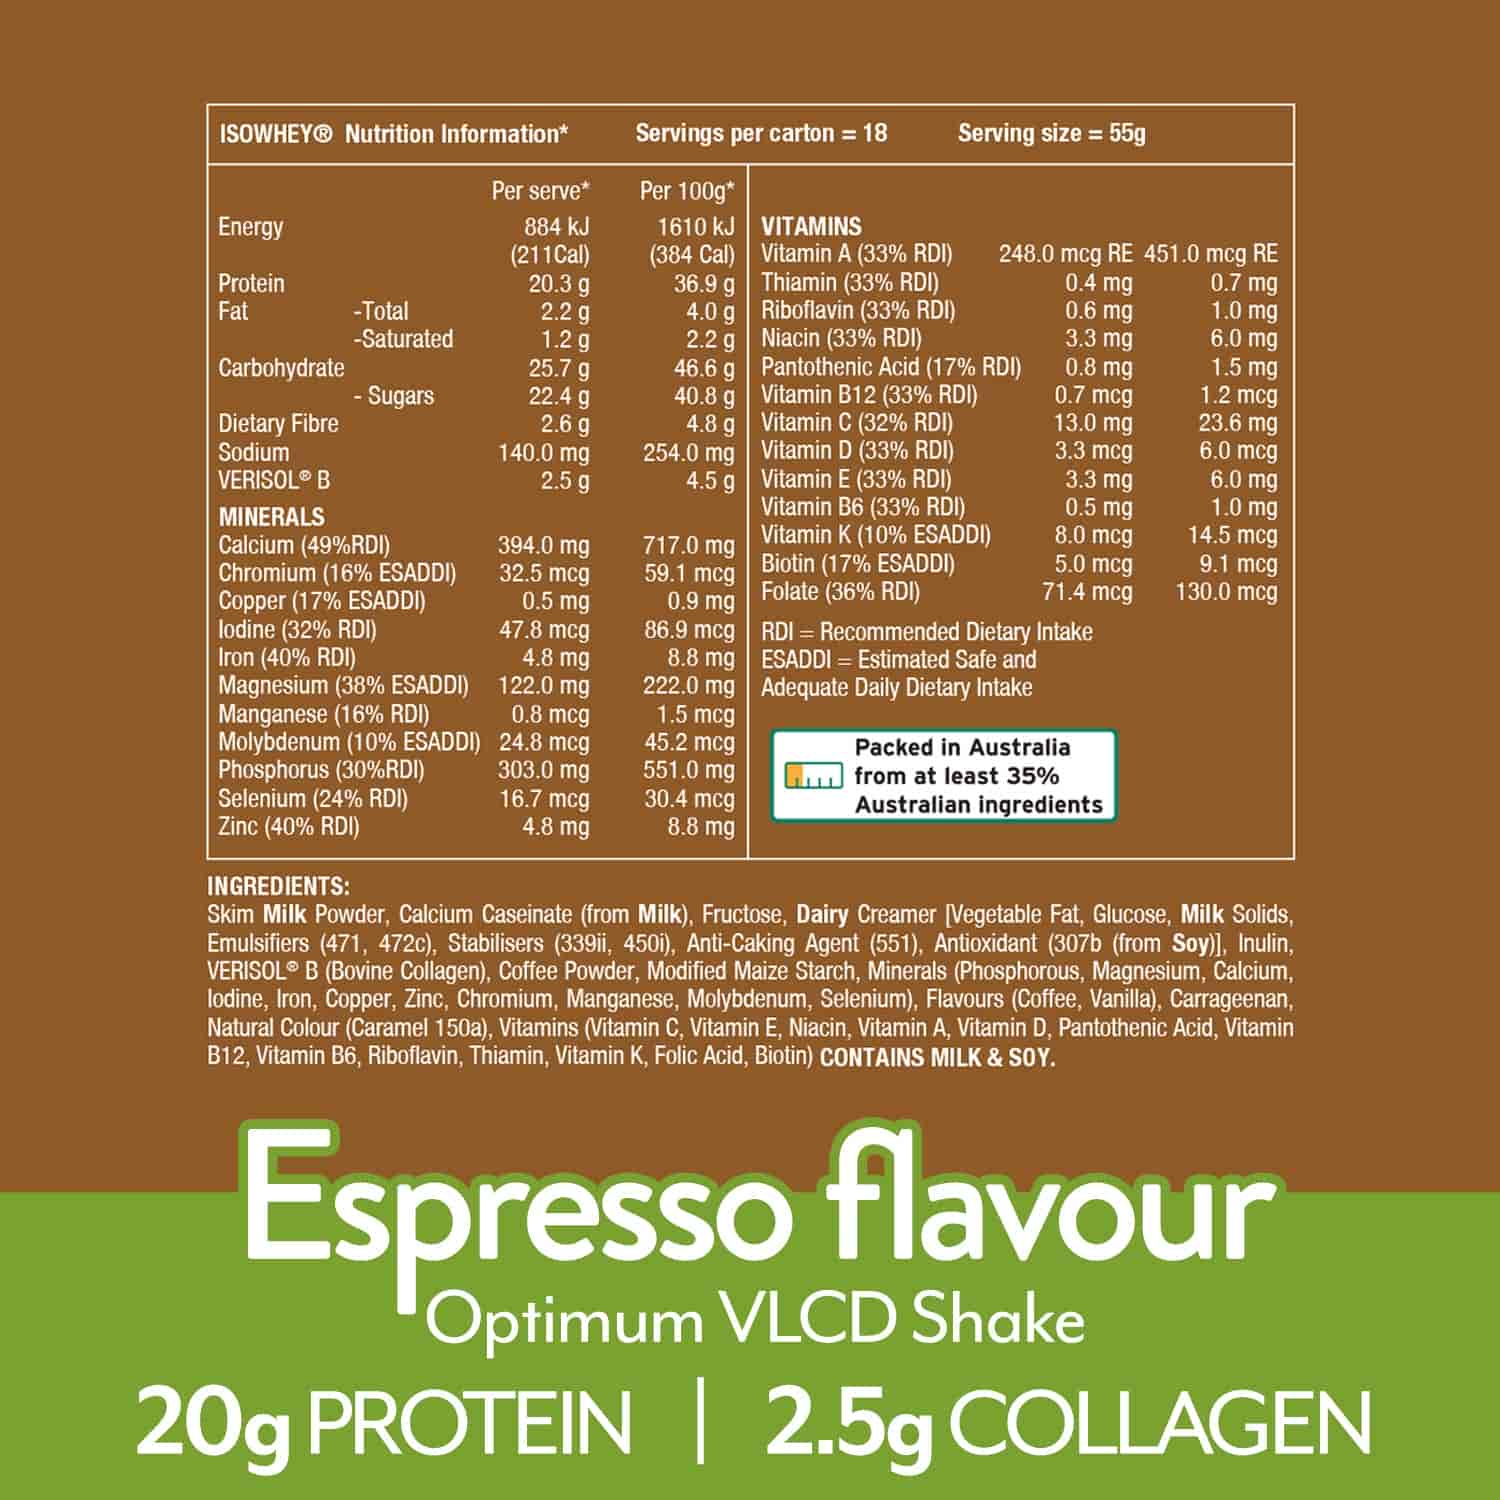 IsoWhey Optimum VLCD Espresso Ingredients and Nutrition information for rapid weight loss